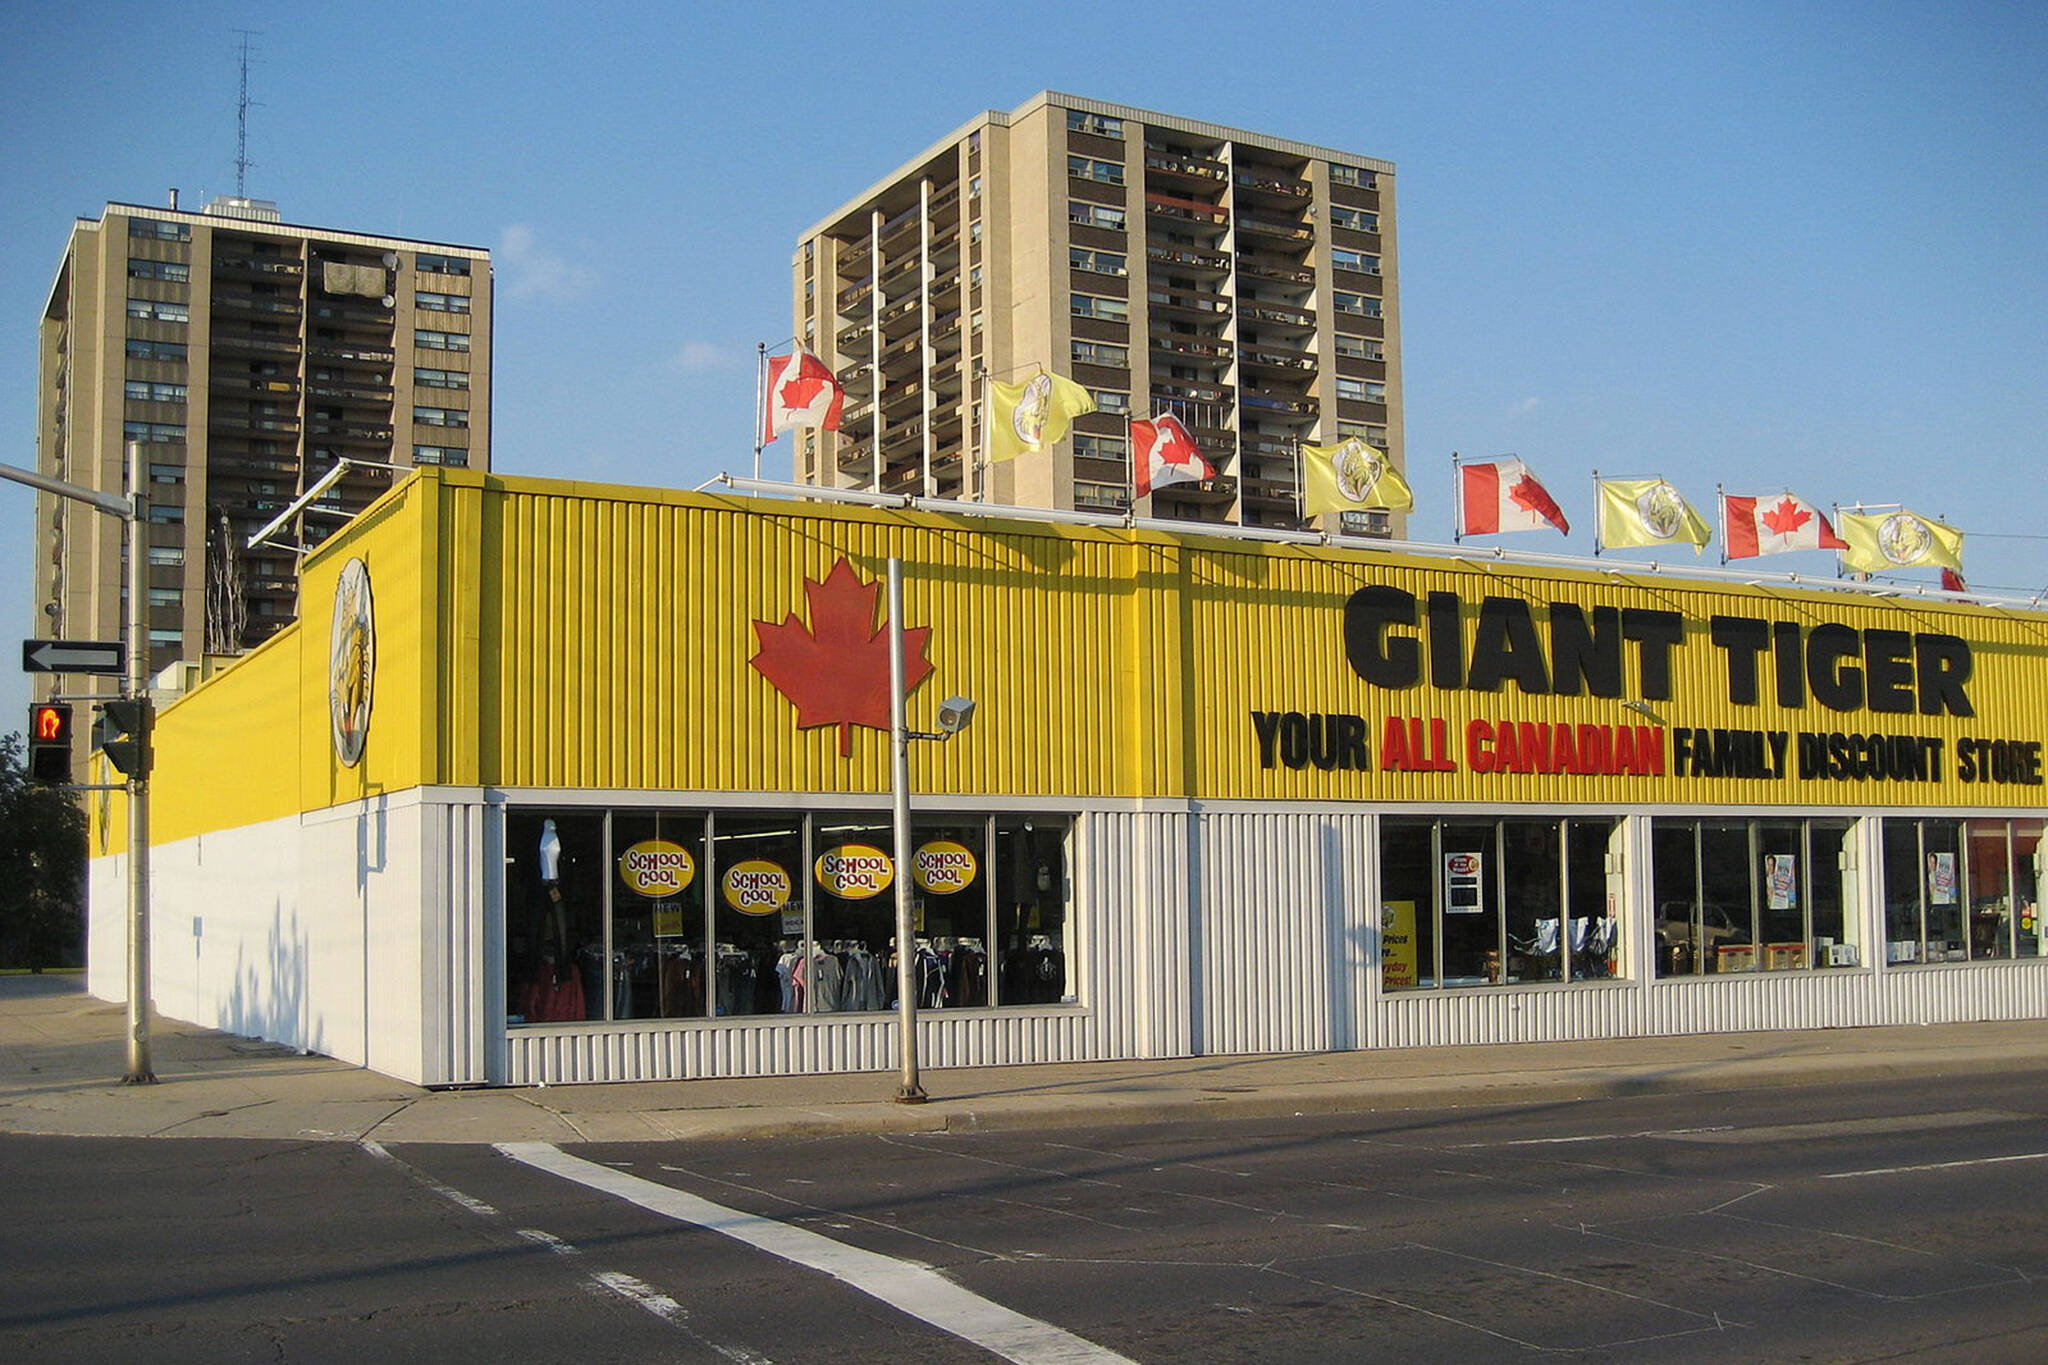 Giant Tiger is expanding with dozens of new stores across Canada